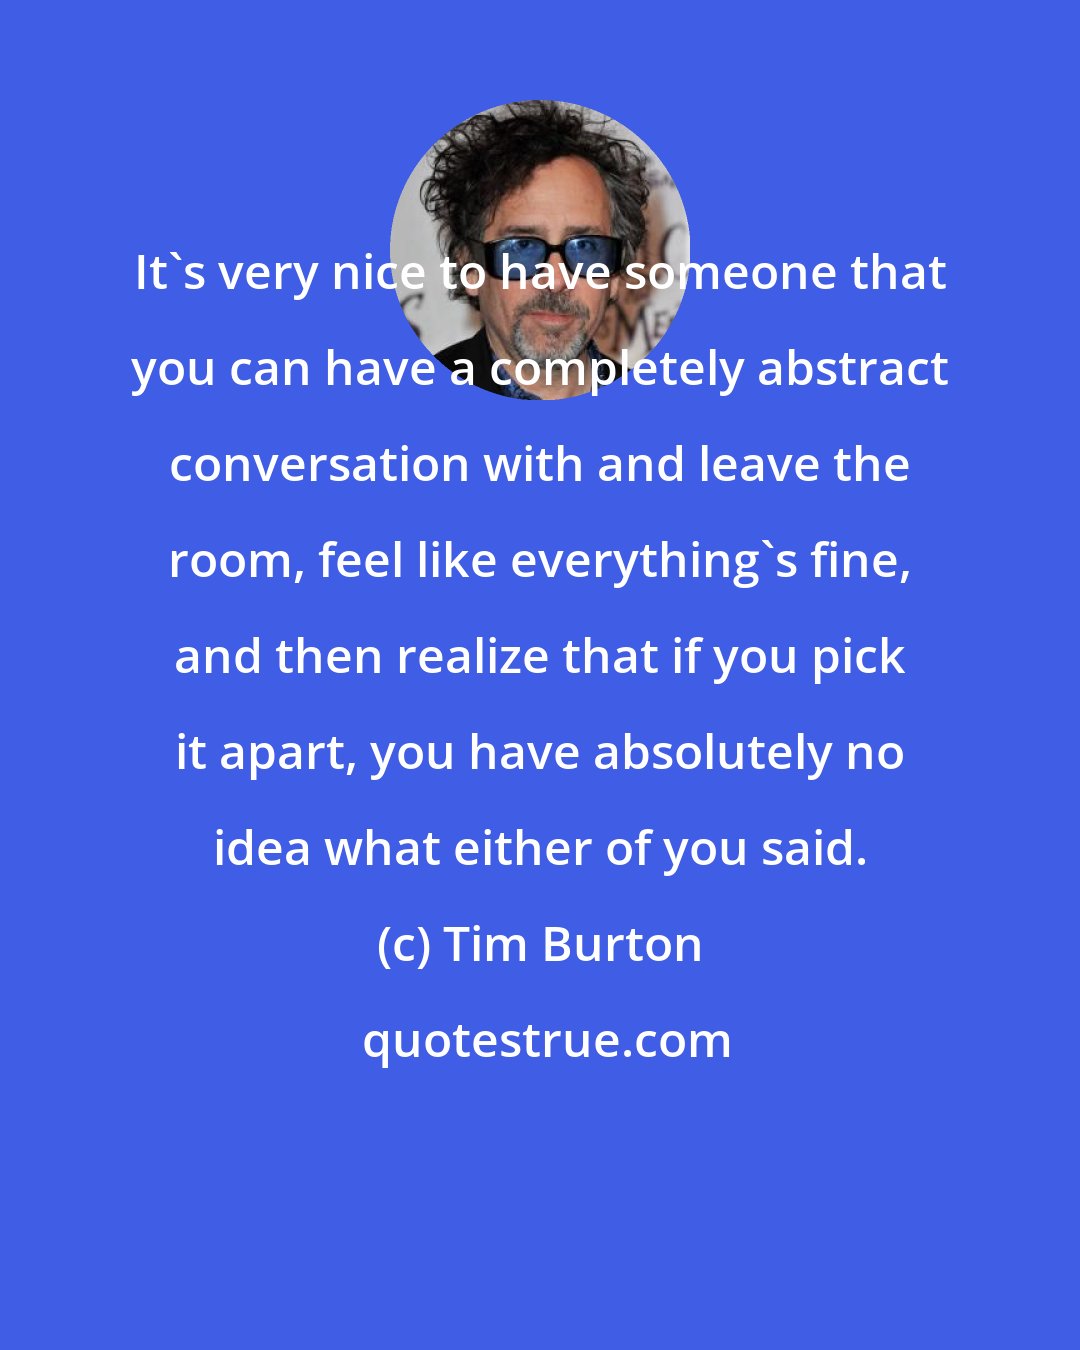 Tim Burton: It's very nice to have someone that you can have a completely abstract conversation with and leave the room, feel like everything's fine, and then realize that if you pick it apart, you have absolutely no idea what either of you said.